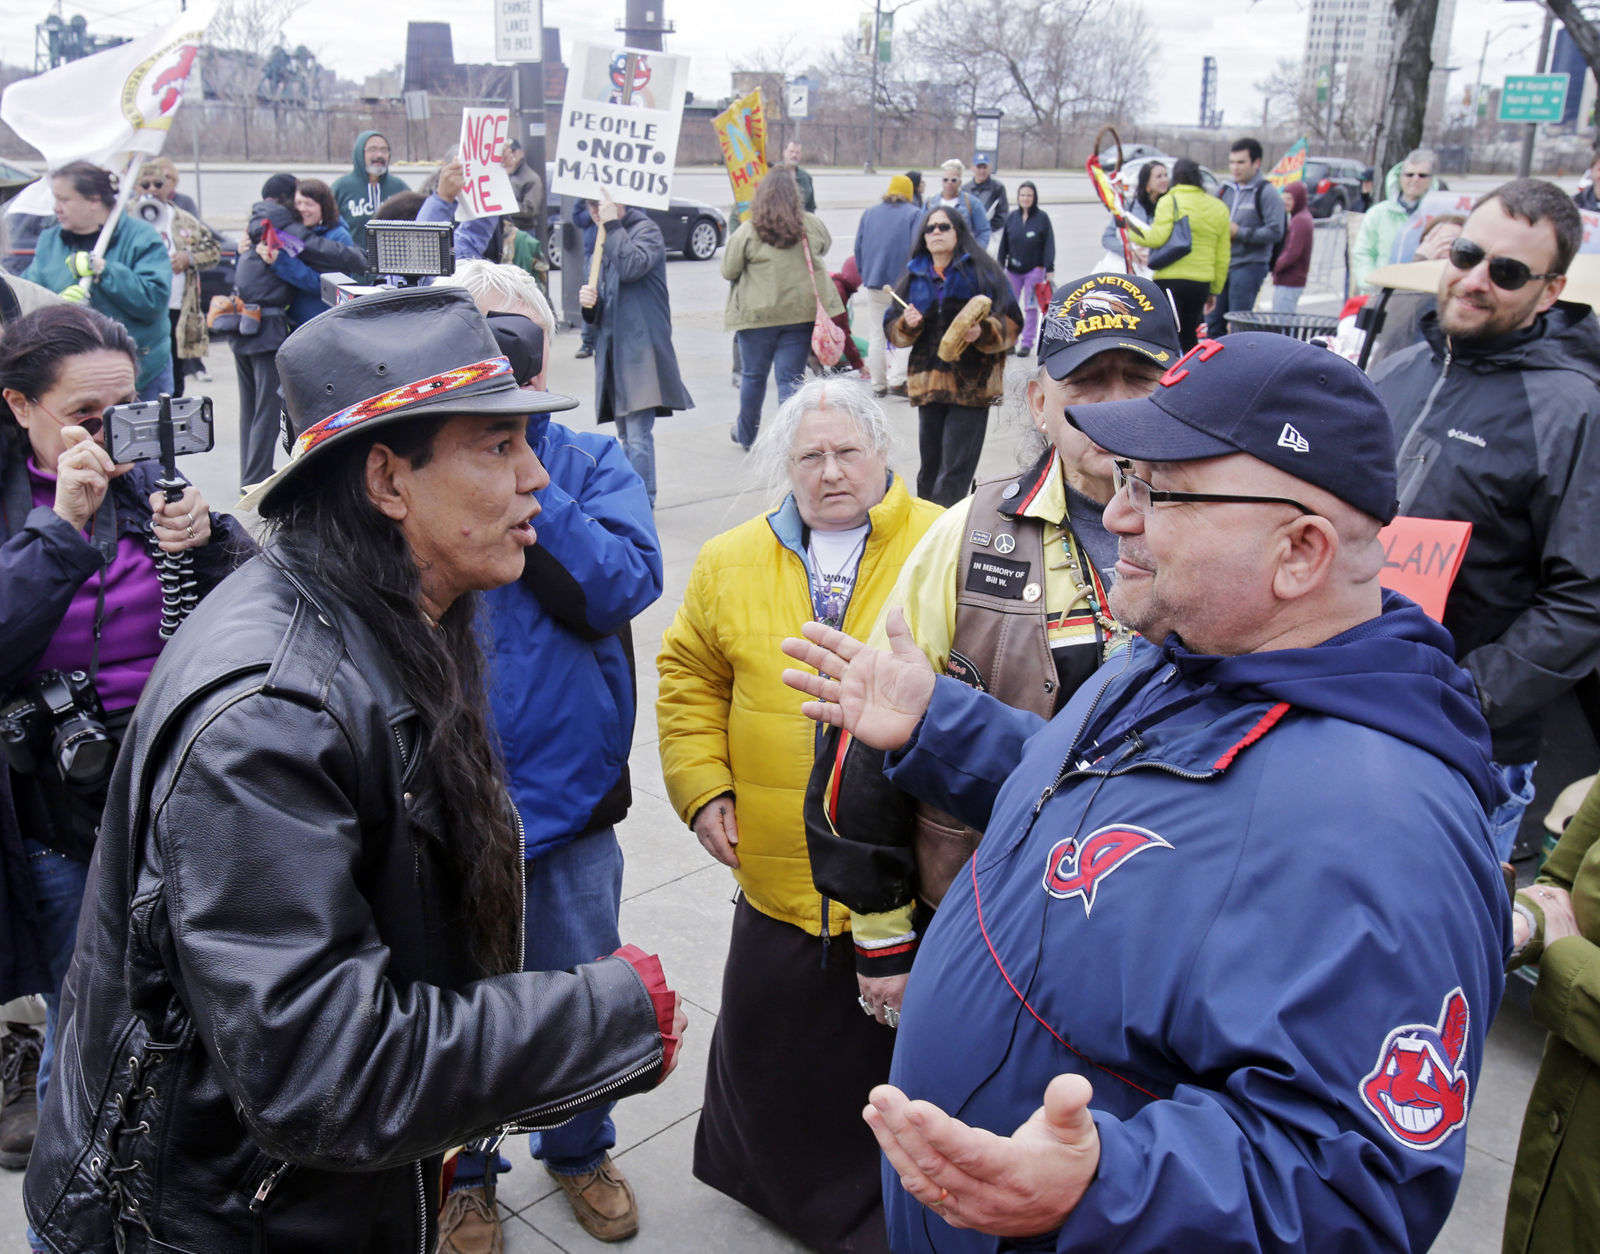 In April 2017, MLB Commissioner Rob Manfred met with the owners of the Cleveland Indians to express his desire that they "transition away from the Chief Wahoo logo."
FILE - In this April 10, 2015, file photo, Philip Yenyo, left, executive director of the American Indians Movement for Ohio, talks with a Cleveland Indians fan before a baseball game against the Detroit Tigers, in Cleveland.  (AP Photo/Mark Duncan, File)